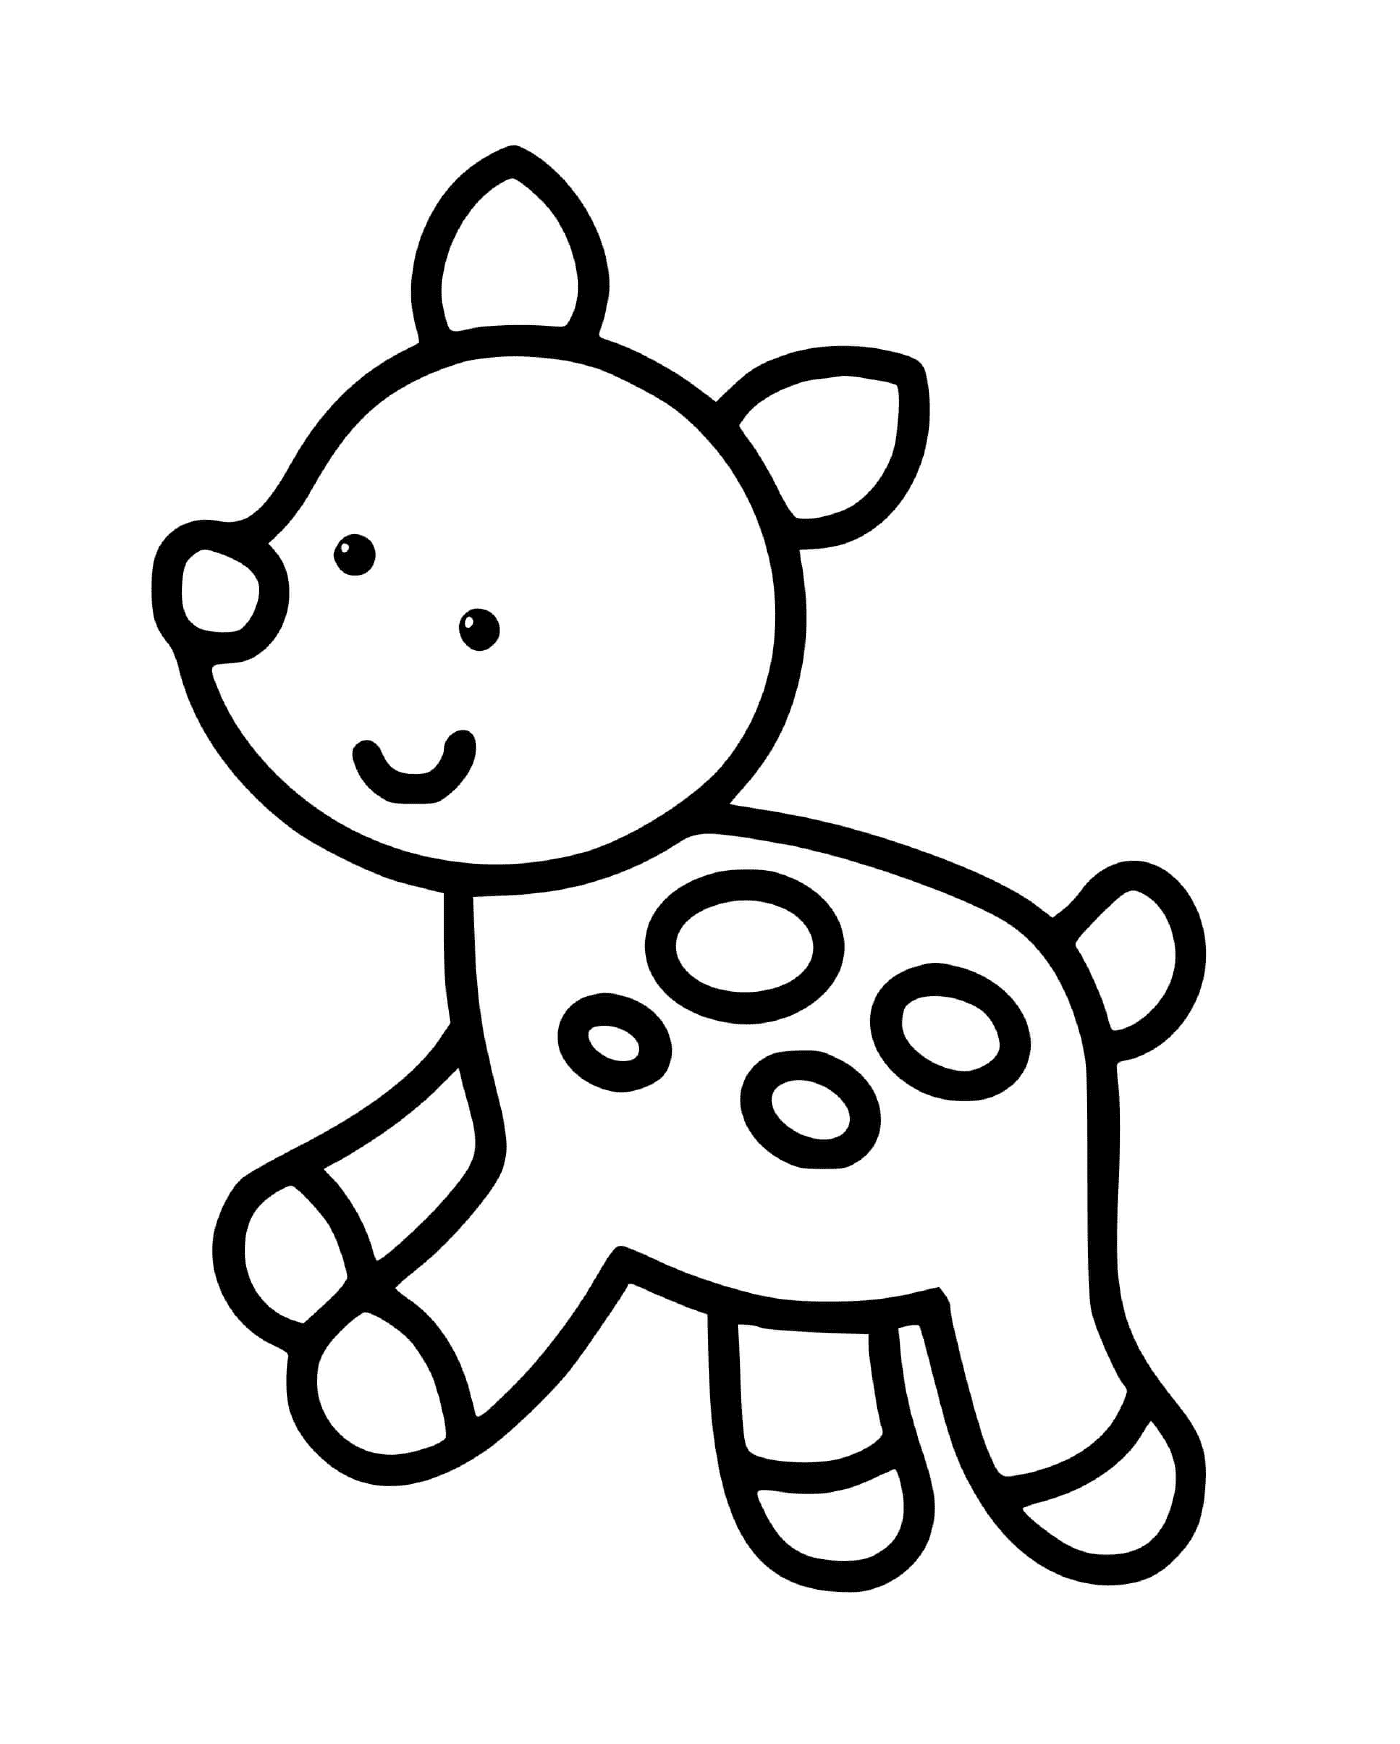  A cute animal easy to draw for 2-year-olds 